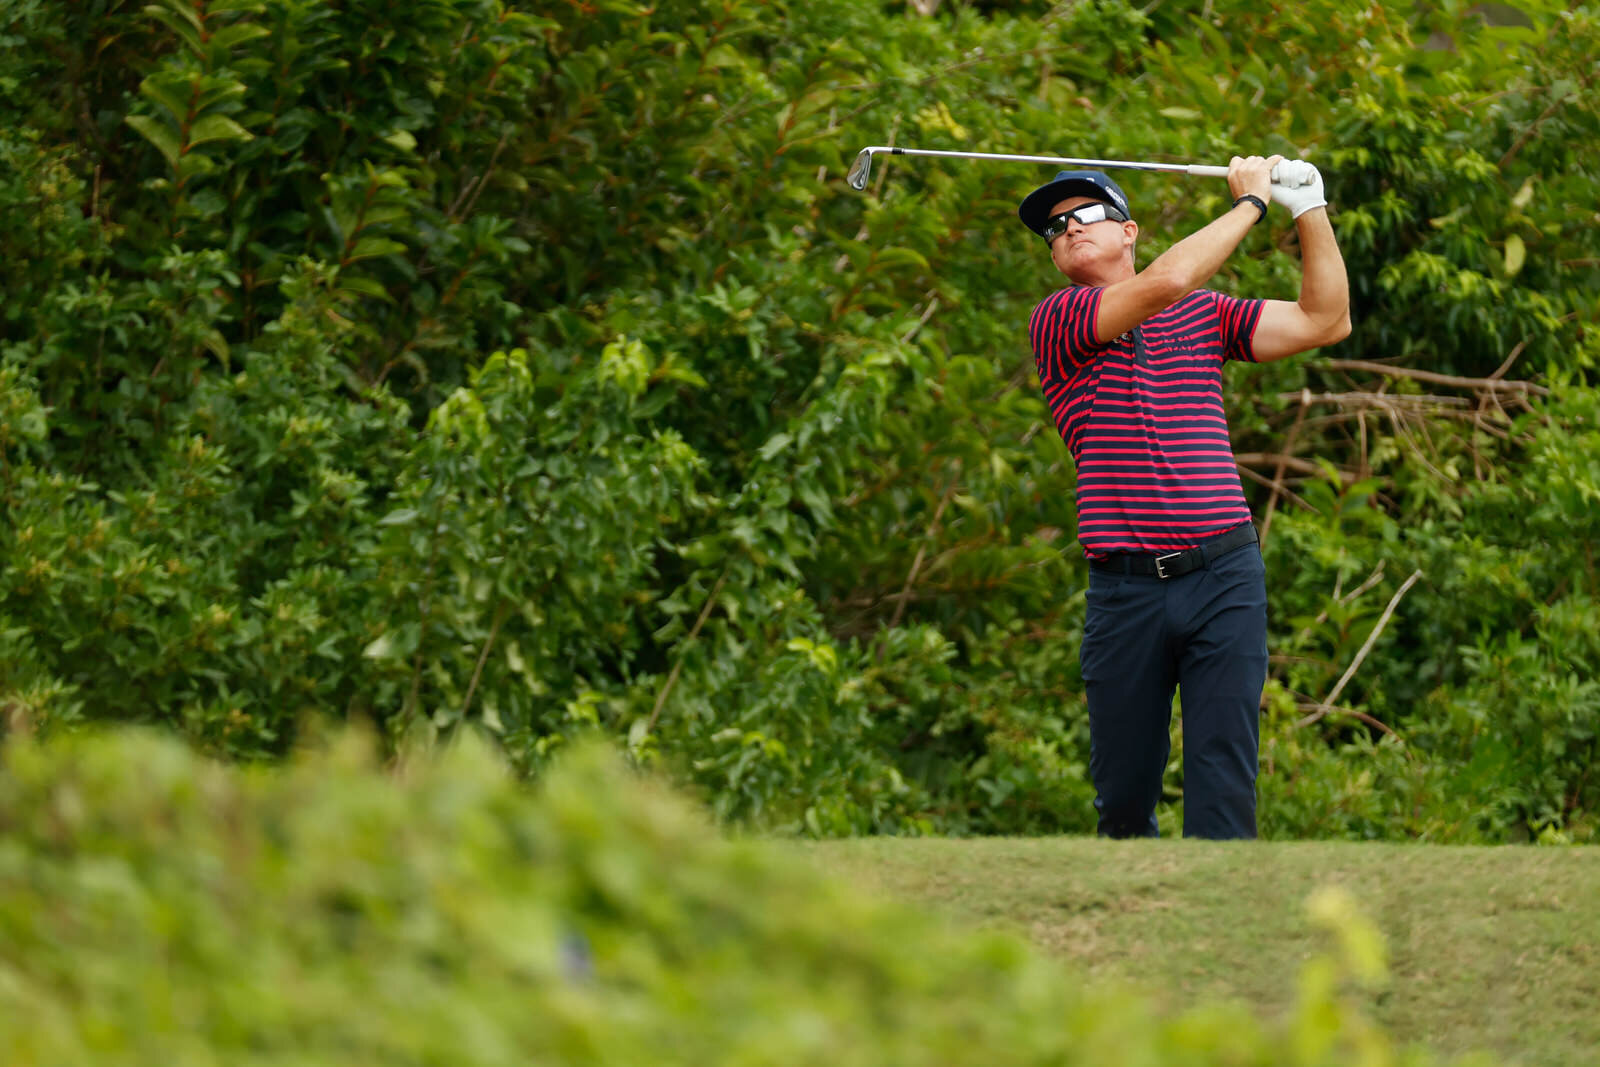  SOUTHAMPTON, BERMUDA - OCTOBER 31: Brian Gay of the United States plays his shot from the eighth tee during the third round of the Bermuda Championship at Port Royal Golf Course on October 31, 2020 in Southampton, Bermuda. (Photo by Gregory Shamus/G